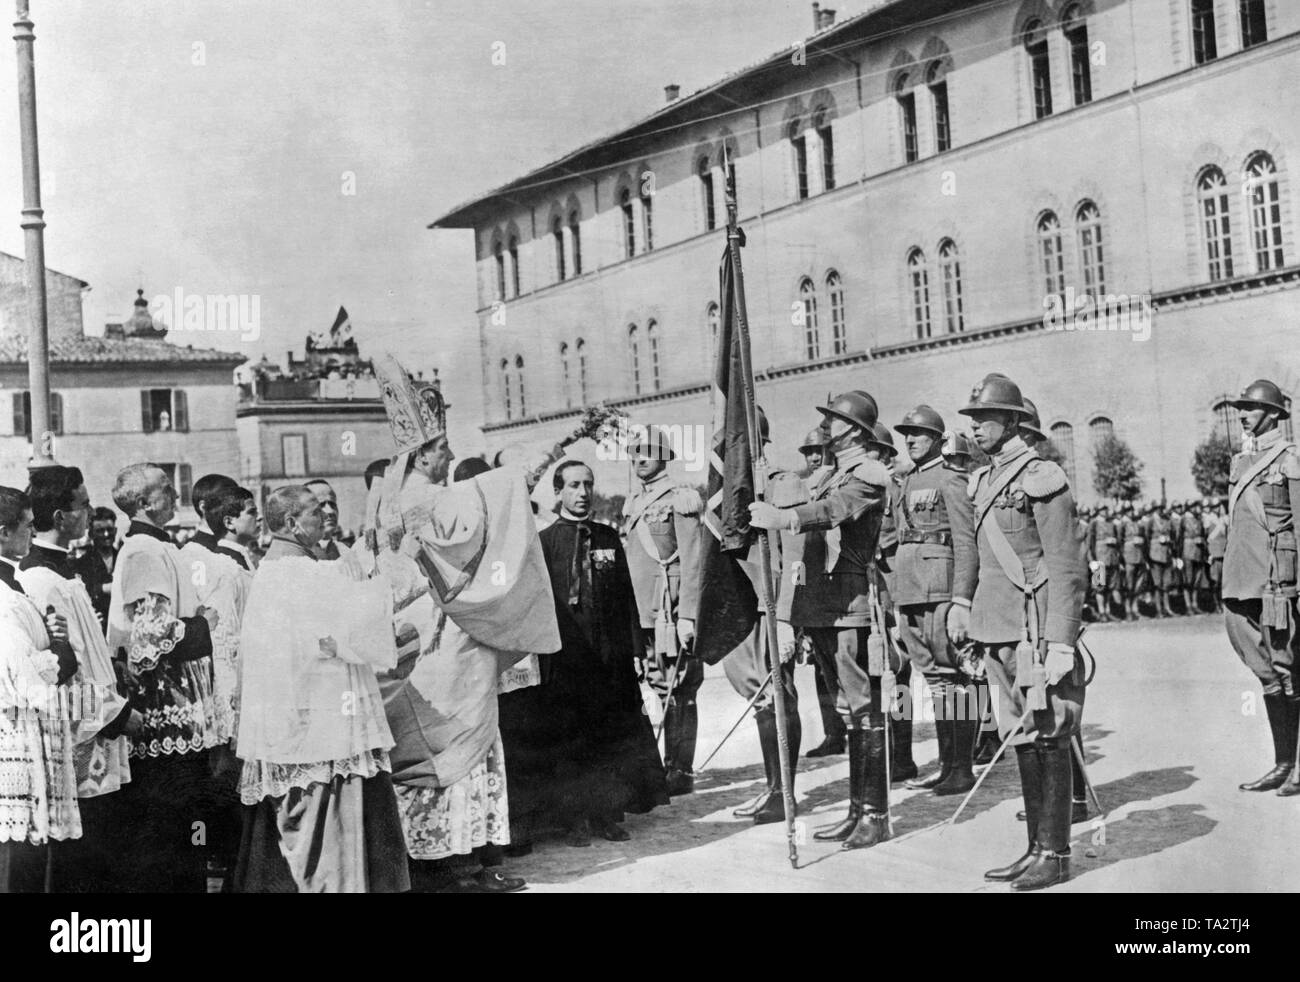 A priest blesses the Third Sardinian Artillery Regiment. In the picture the flag is being blessed. The reconciliation process between the Vatican and the Italian state after 60 years of conflict ended with the Lateran Treaty of 1929. Stock Photo